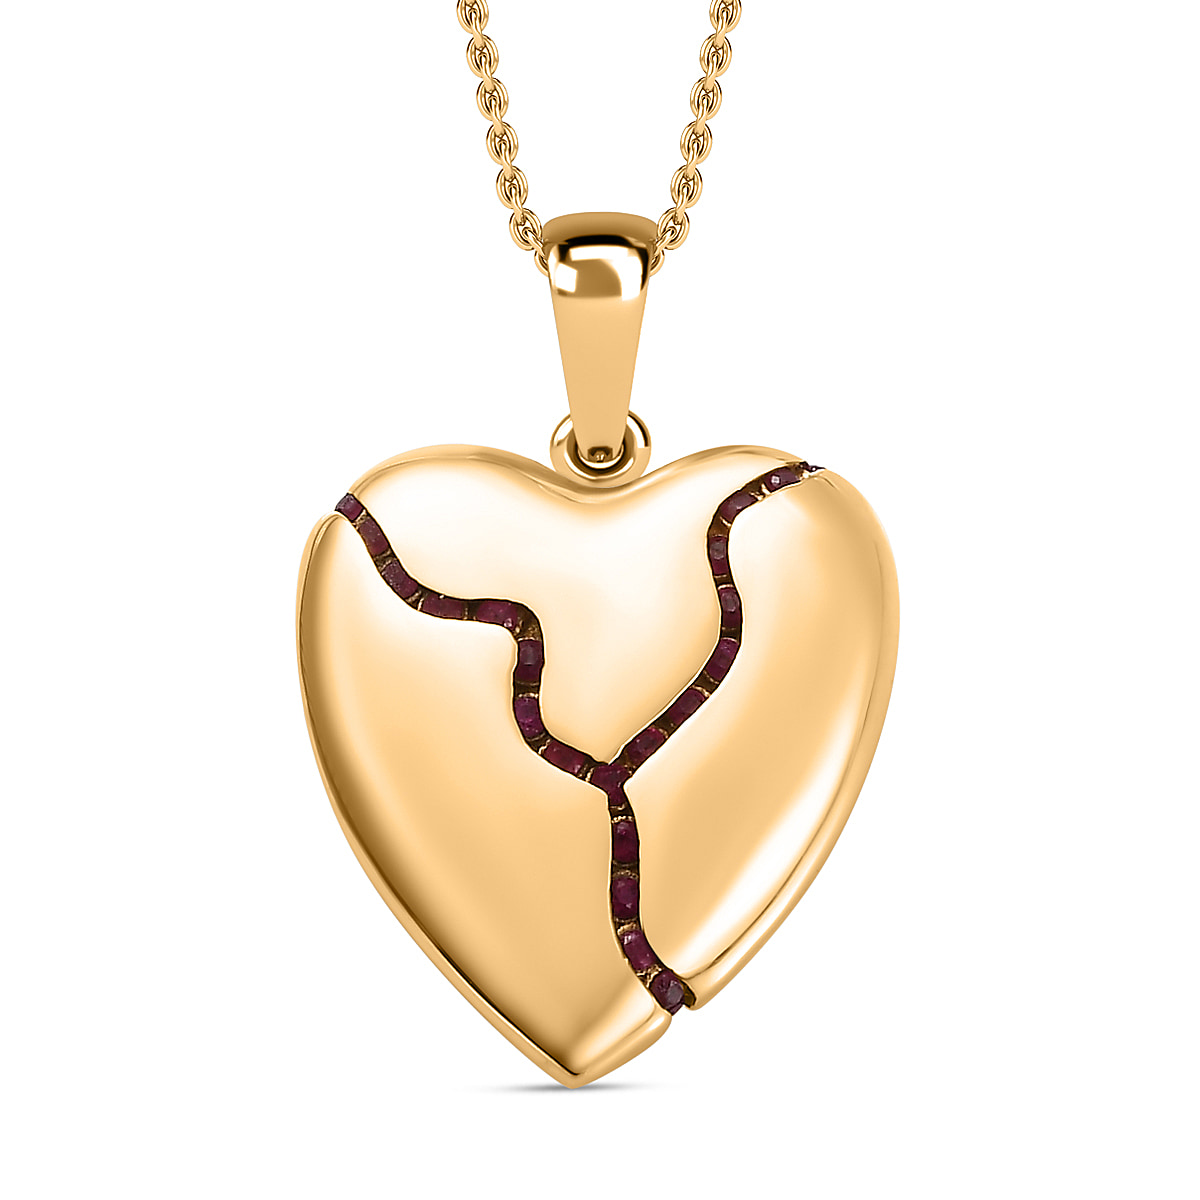 Designer Inspired - Ruby Heart Pendant with Chain (Size 20) in 18K Yellow Gold Vermeil Plated Sterling Silver